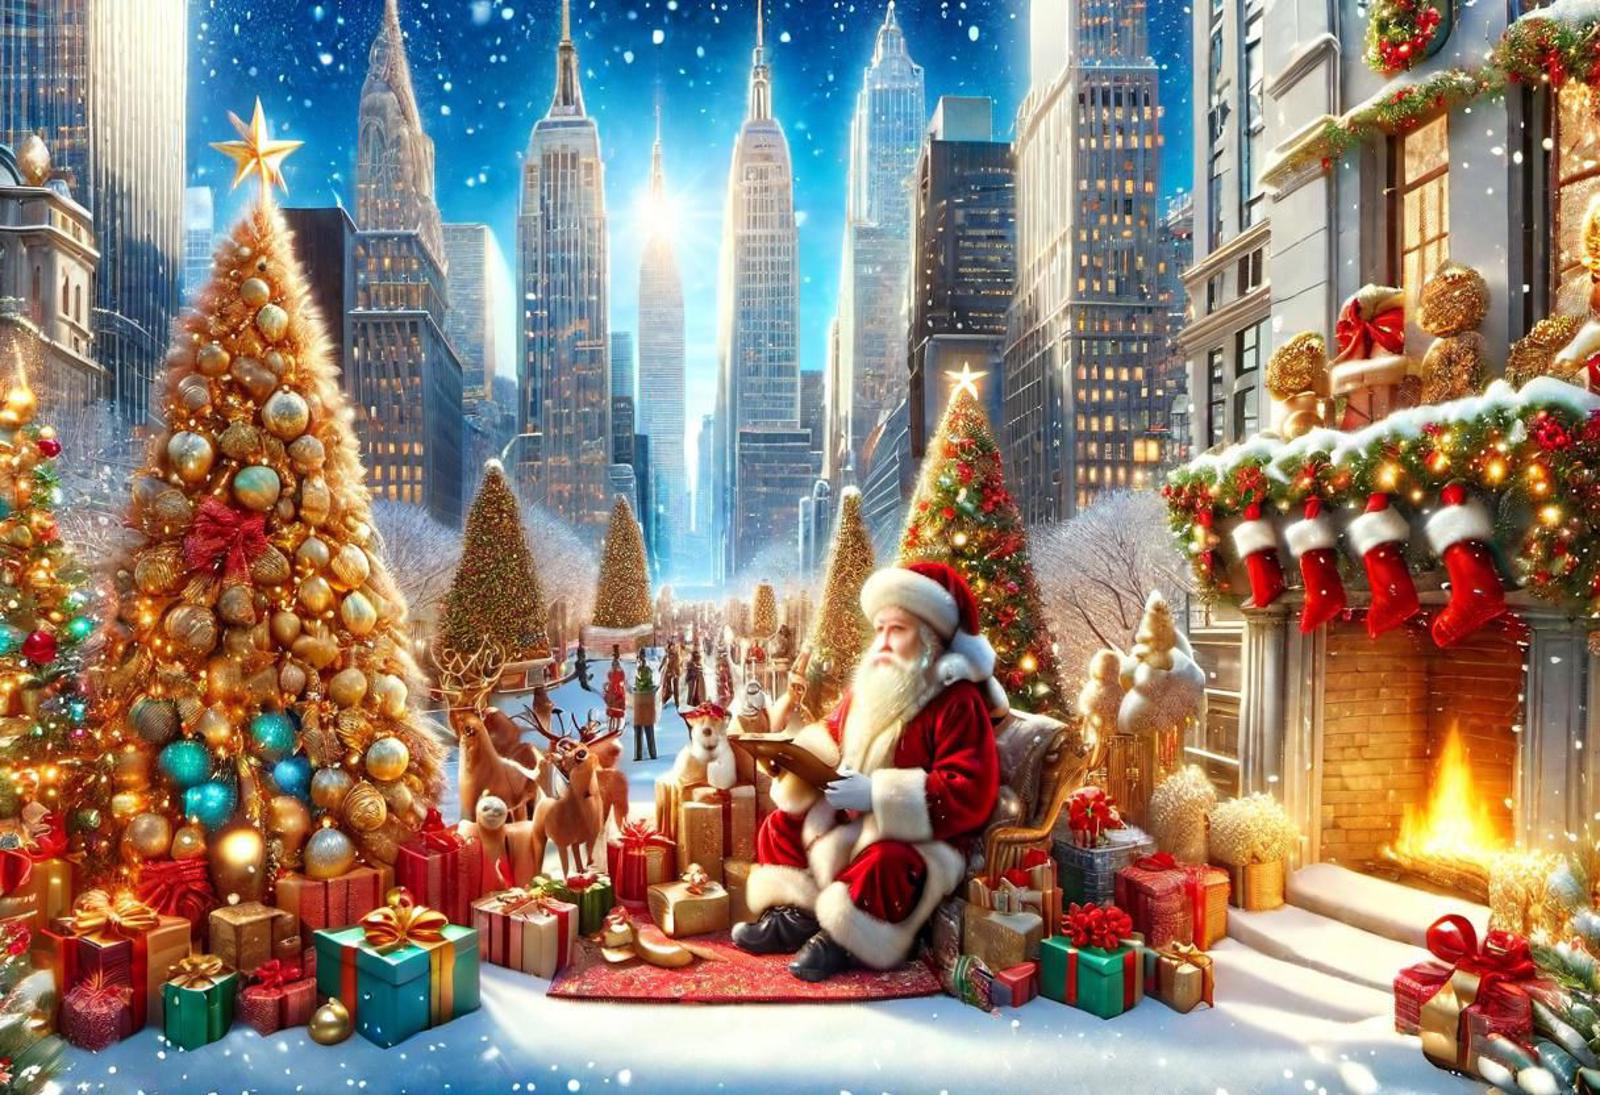 A Santa Claus Christmas scene with a city skyline in the background.